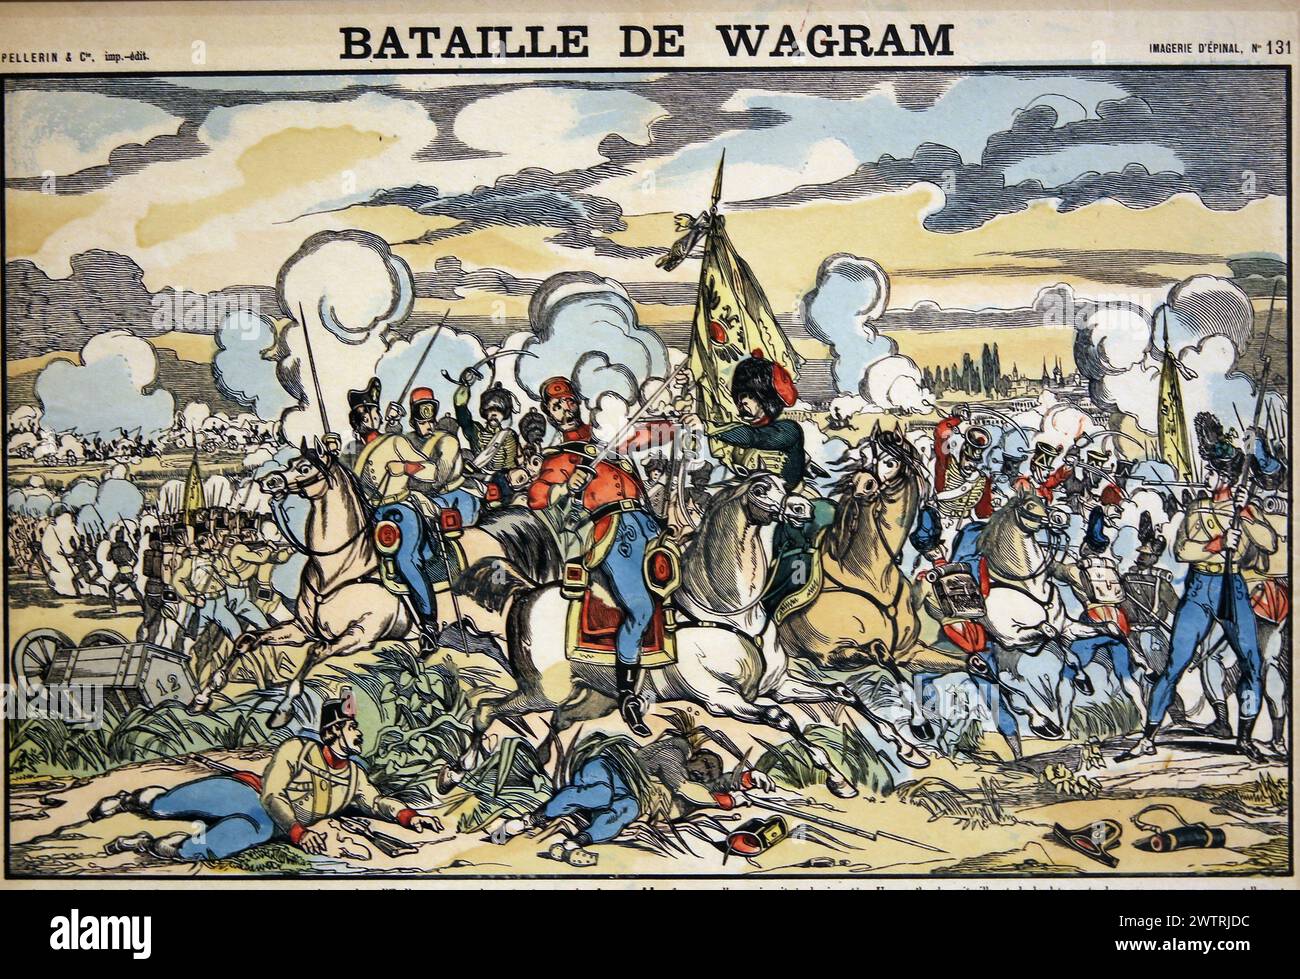 Napoleonic Wars. War of the Fifth Coalition. Battle of Wagram, July 1809. Belligerents: France, Austrian. French victory. Engraving by F. Georgin. Stock Photo